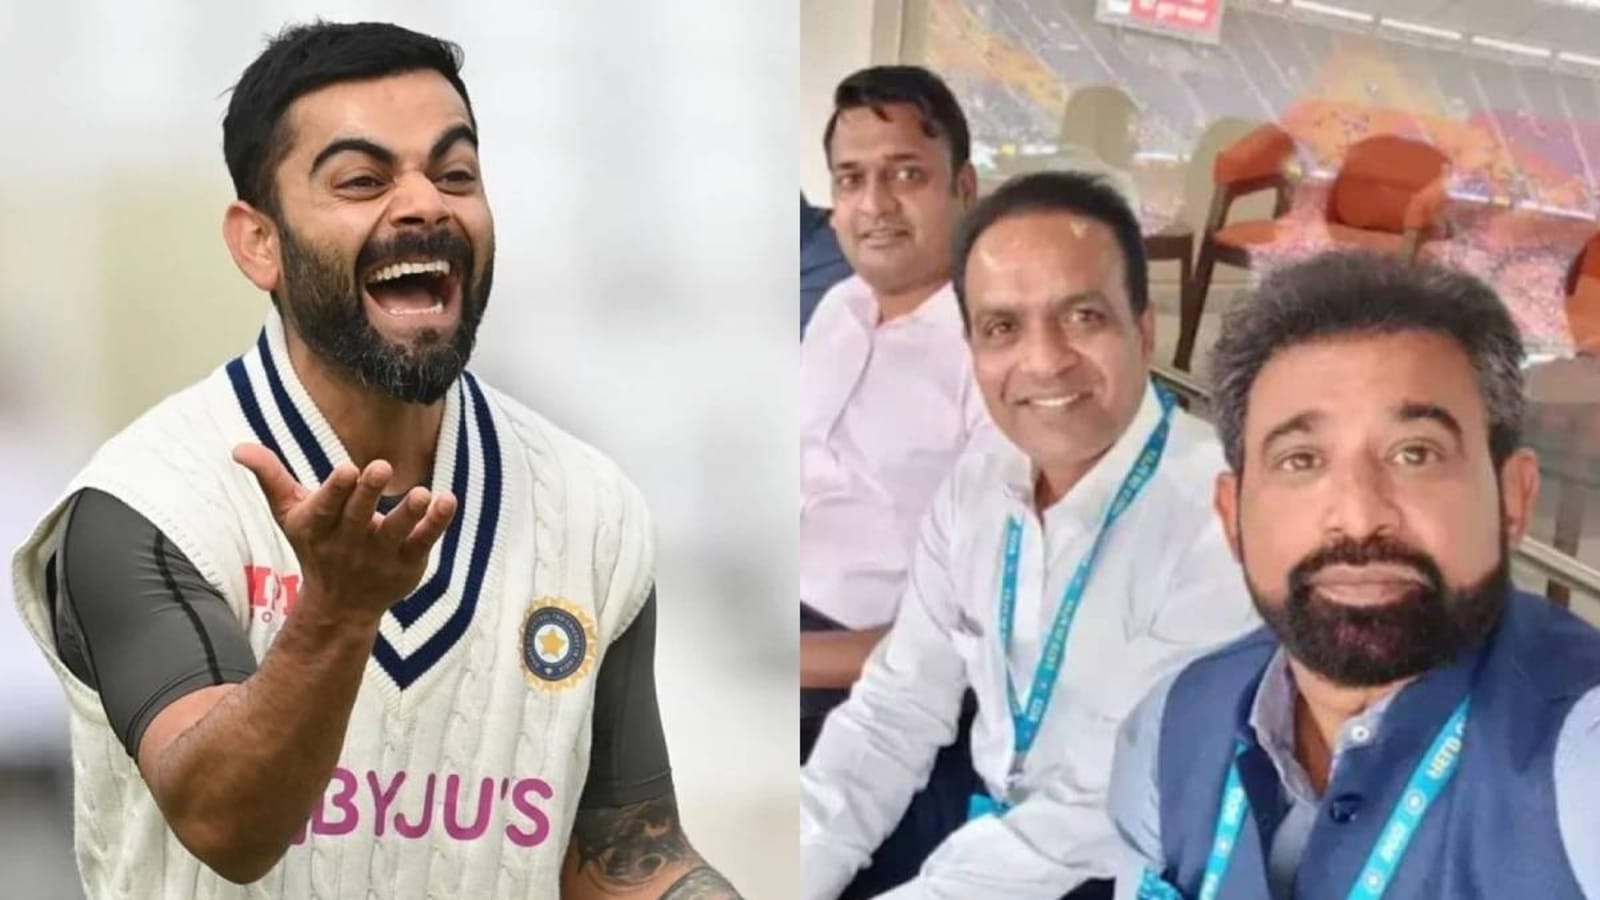 that-s-karma-and-chetan-got-served-king-stands-tall-fans-react-with-kohli-memes-after-bcci-sacks-selection-committee